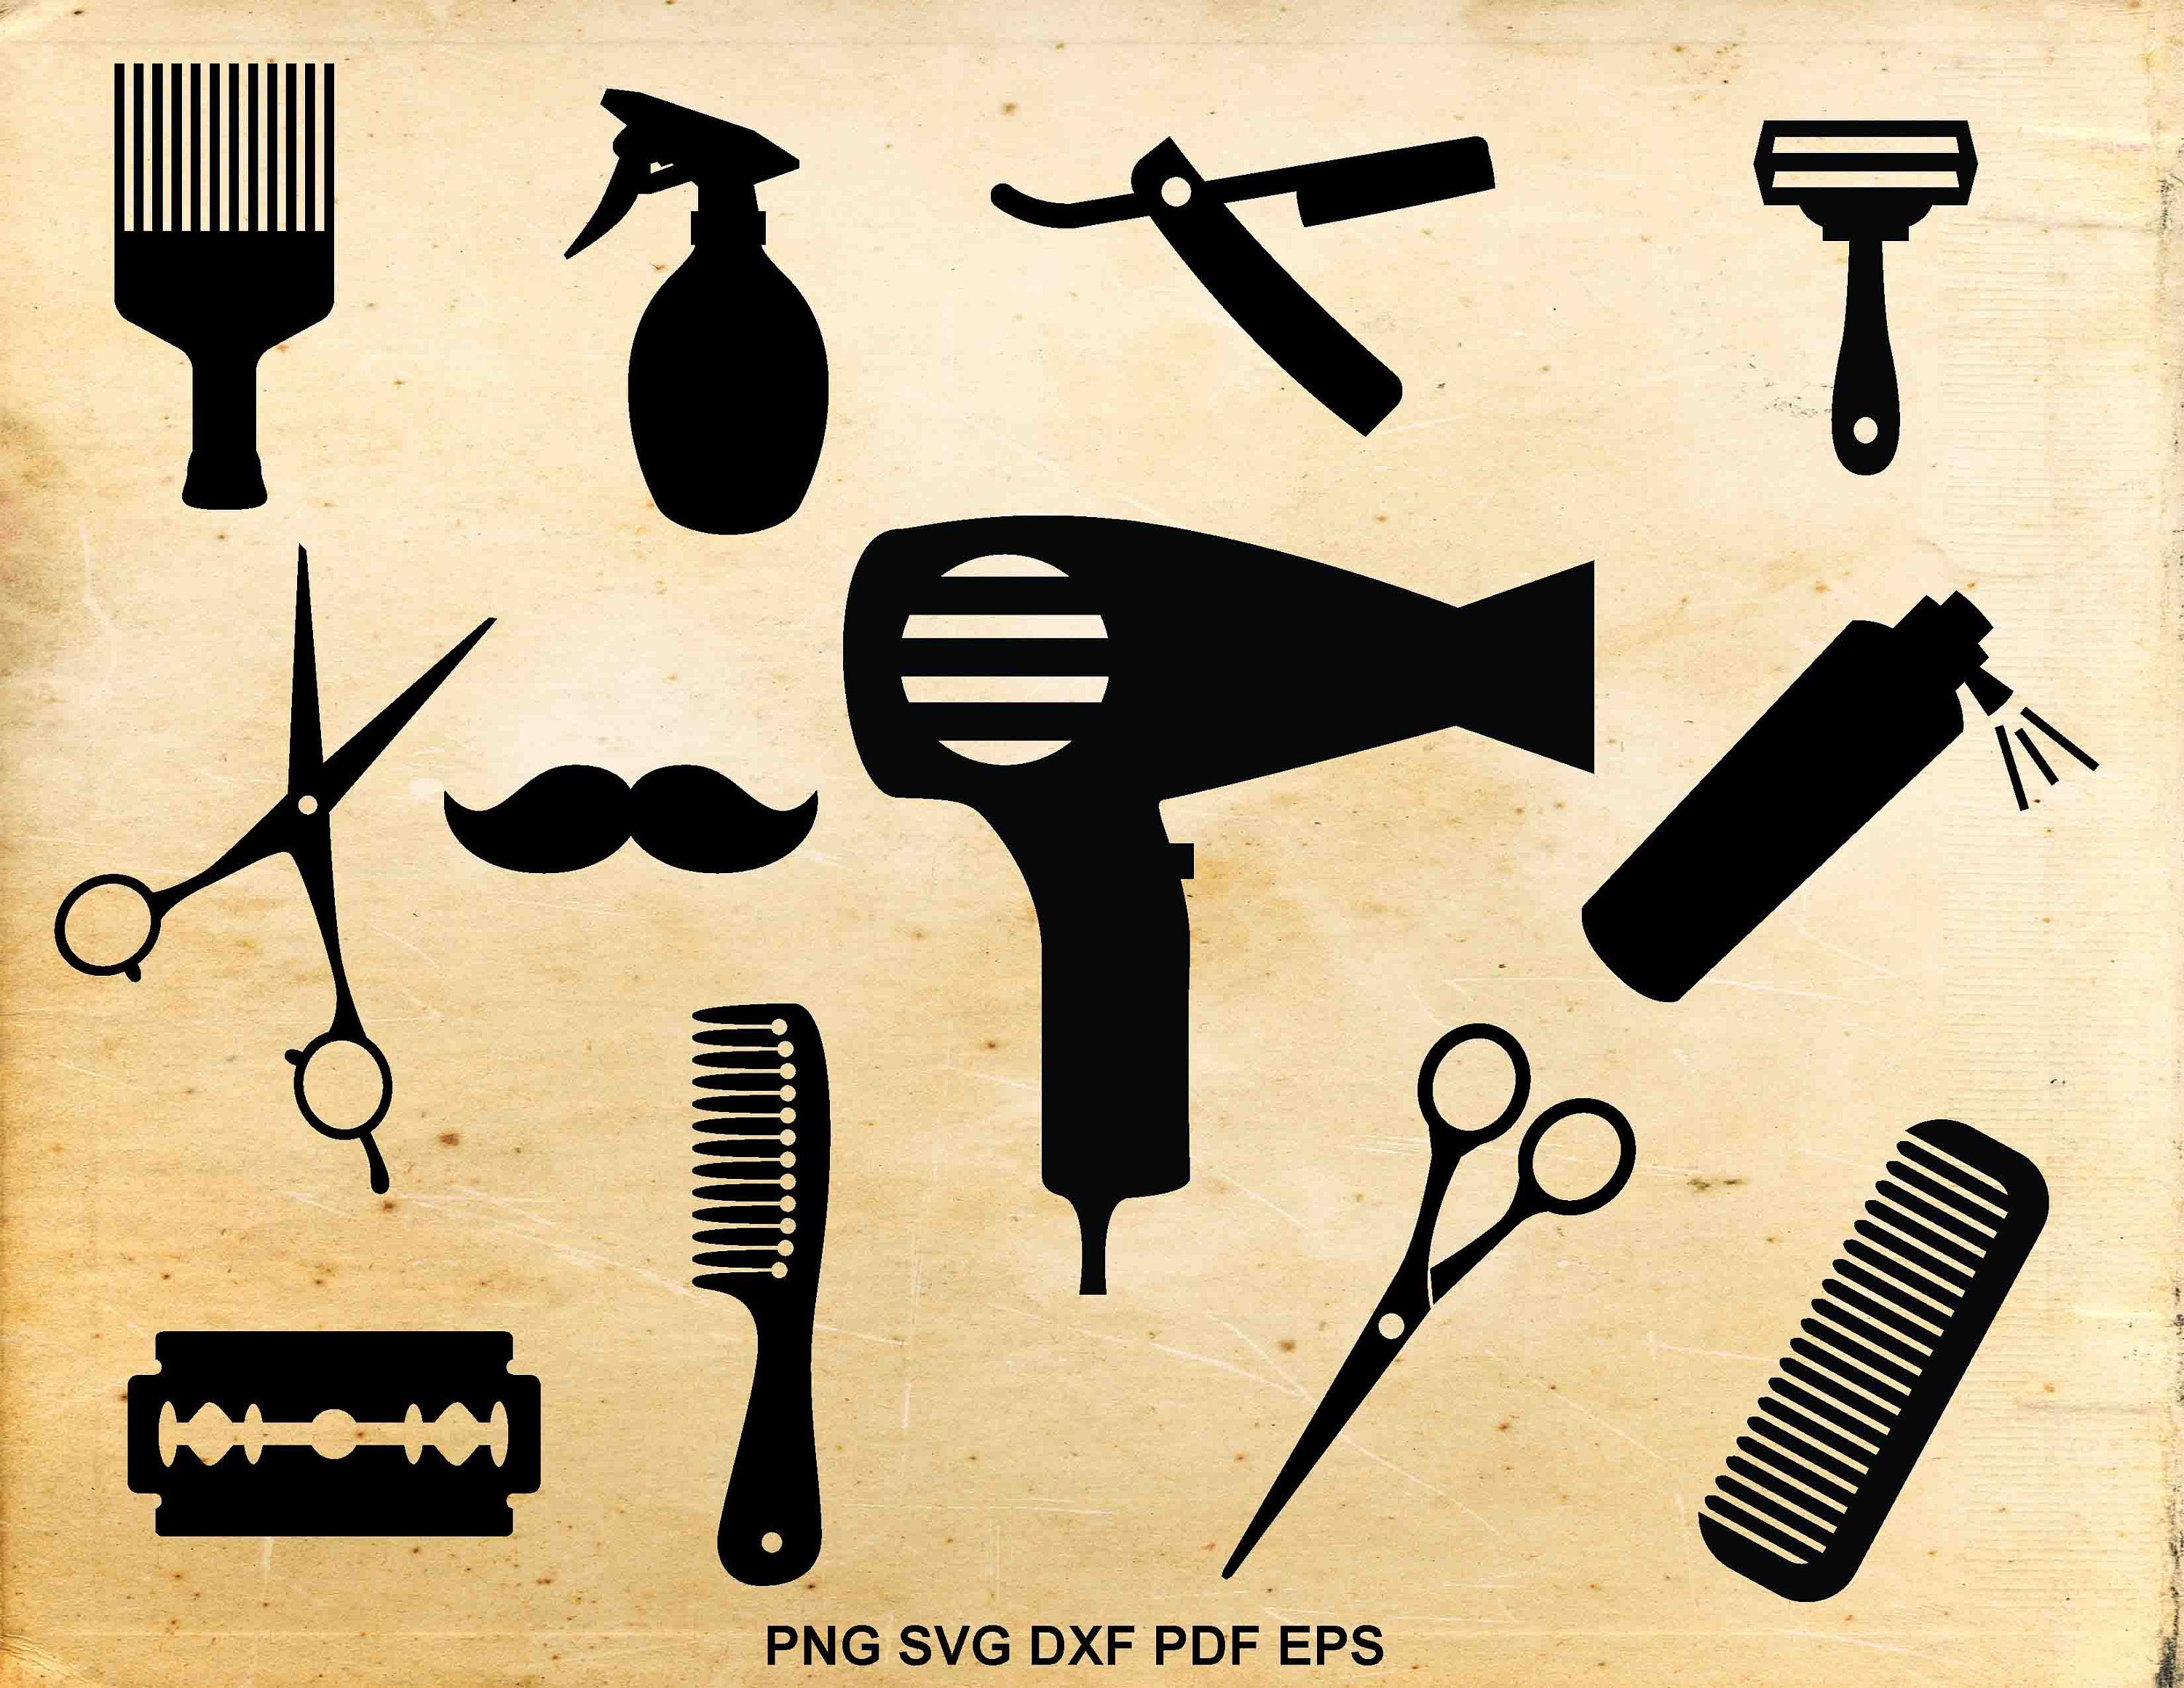 Download Free SVG Cut File - Silhouette Man Barber Tools Haircut Icons Stoc...